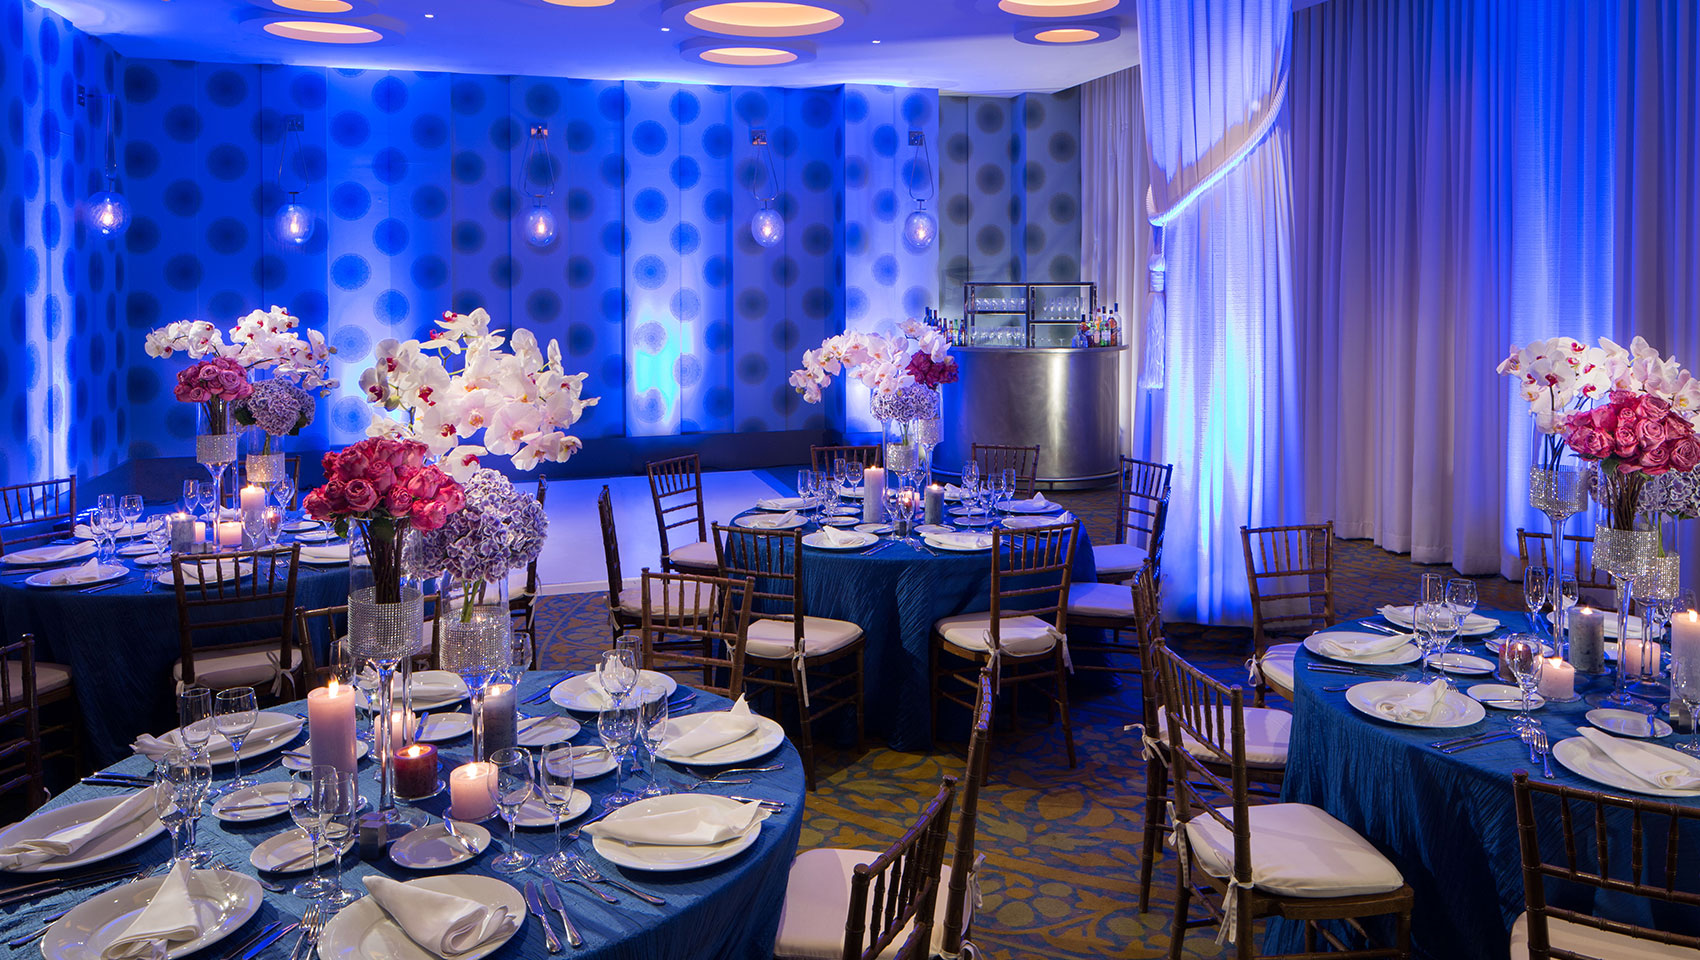 Venue space set up for event with round tables, tall floral arrangements, and dance floor